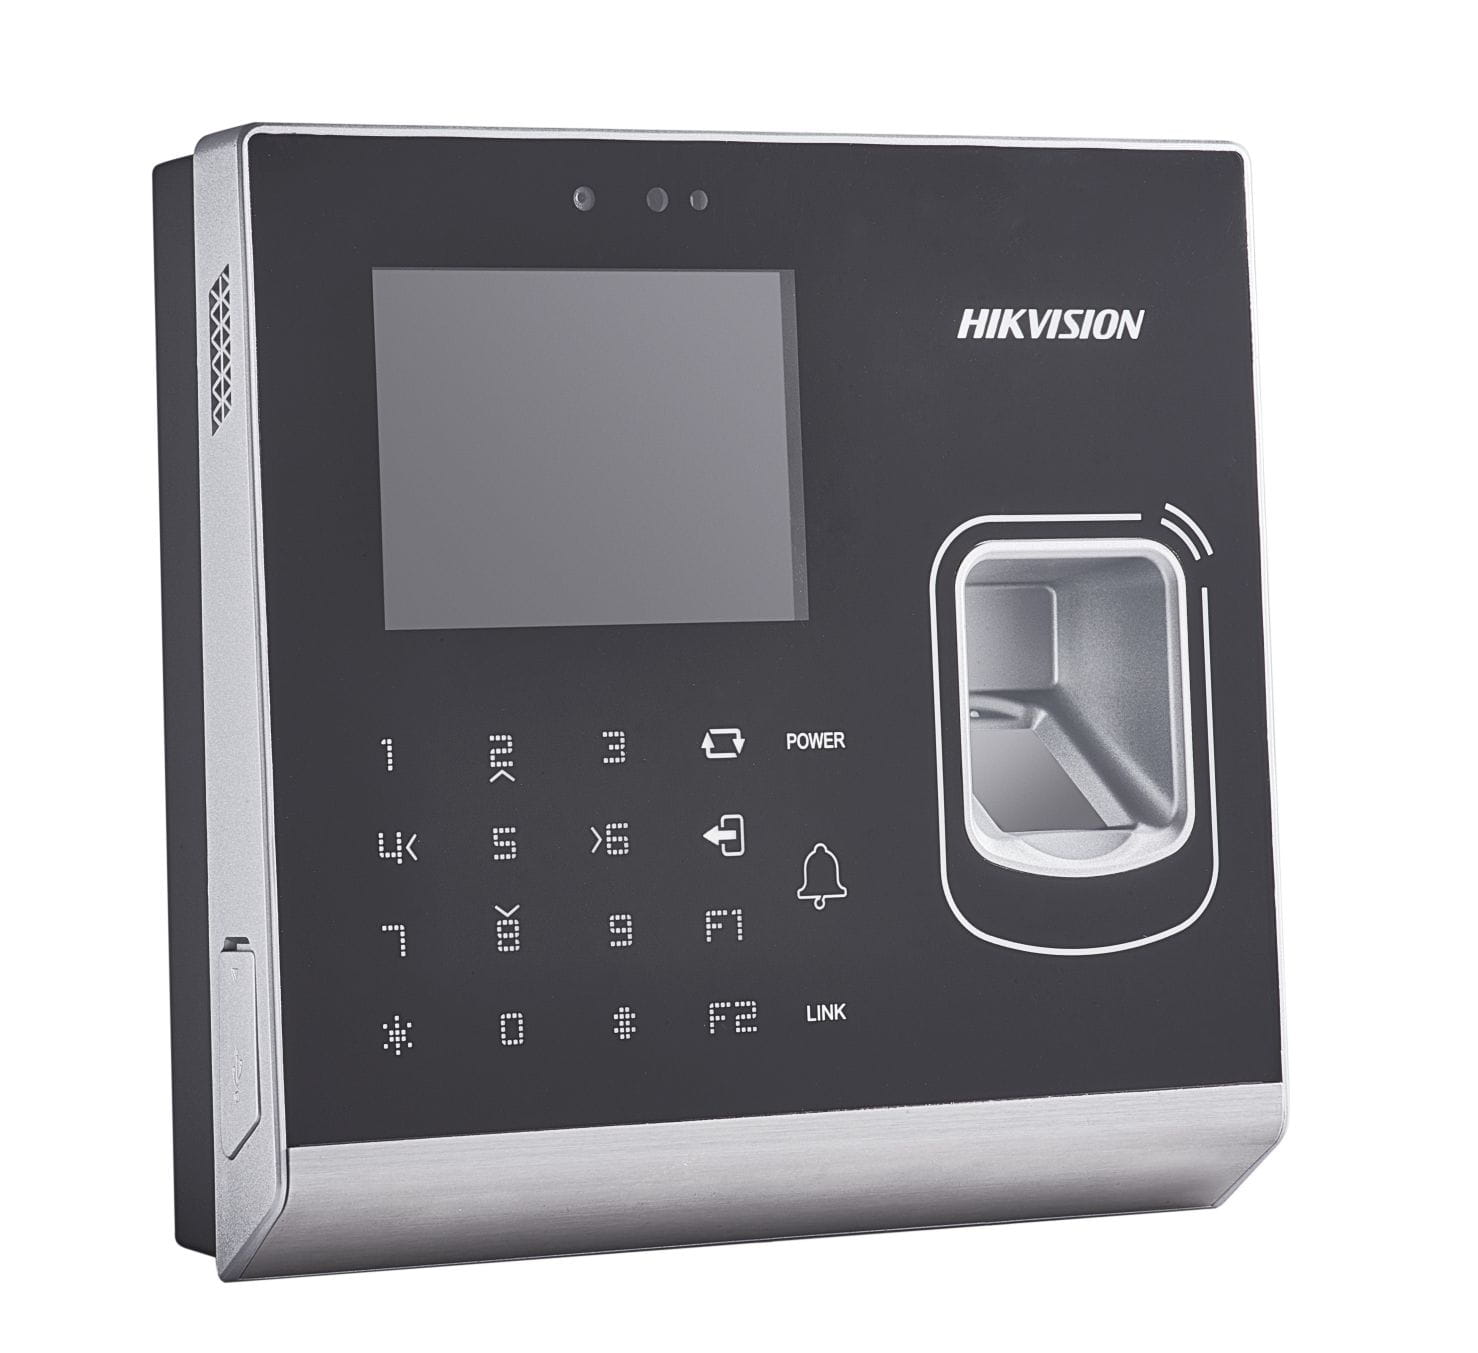 Hikvision 2.8 inch LCD-TFT screen IP - Based fingerprint access control terminal - DS-K1T201EF-C